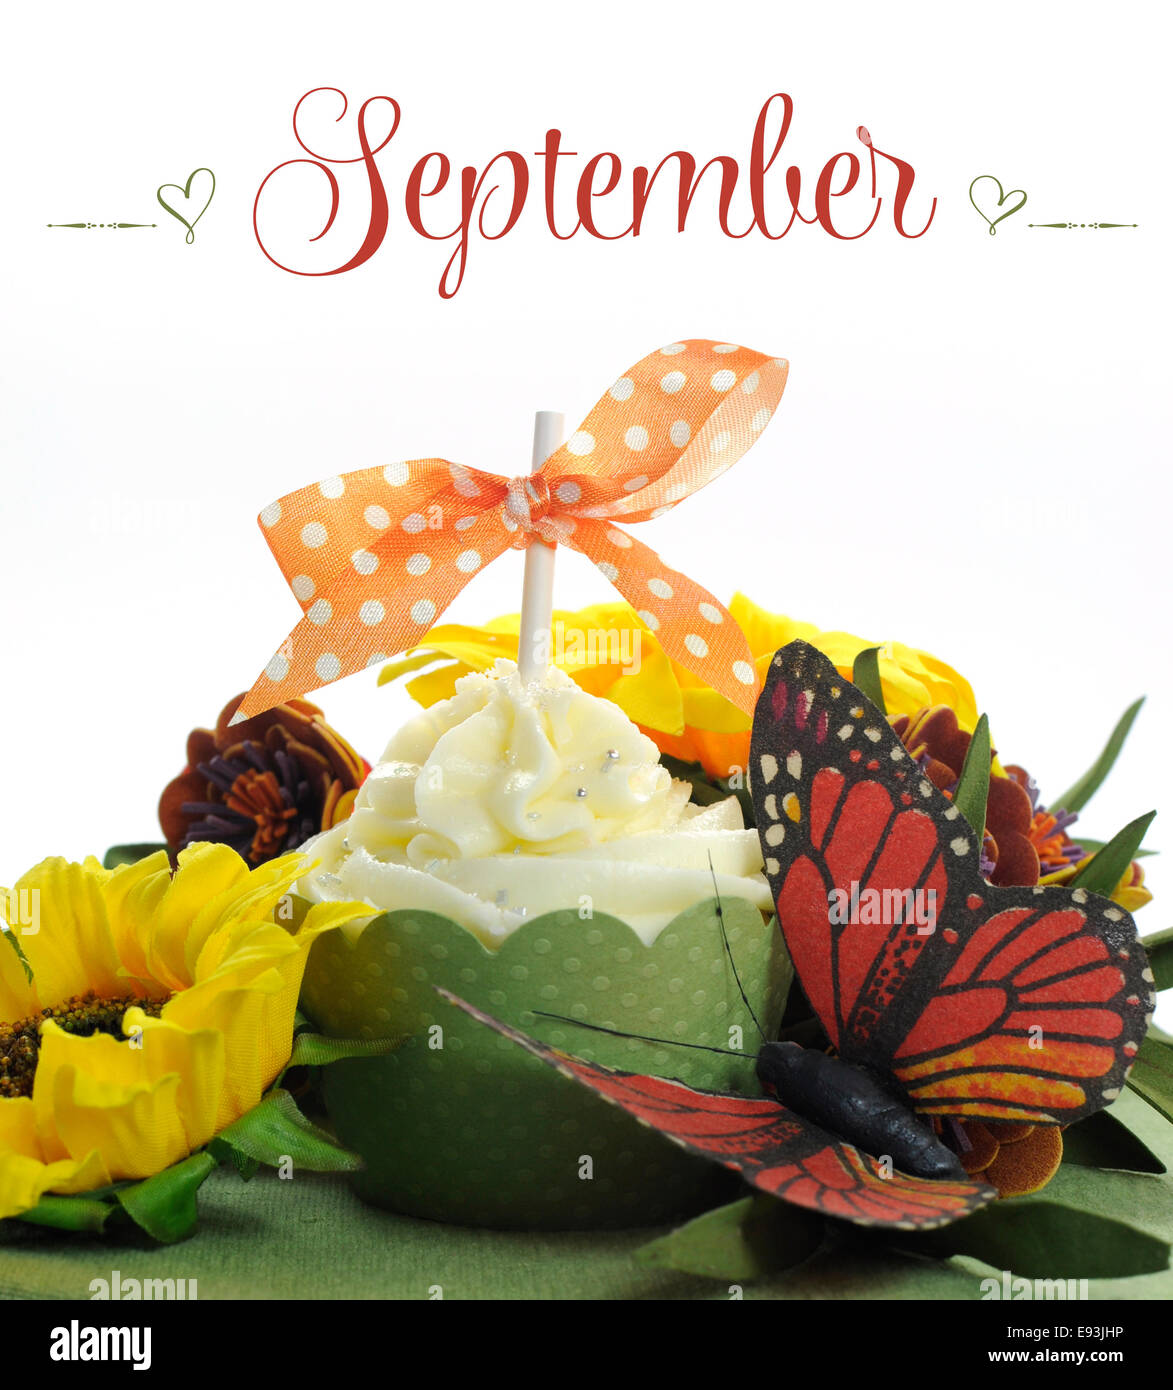 Beautiful Autumn Fall theme cupcake with autumn seasonal flowers and decorations for the month of September Stock Photo